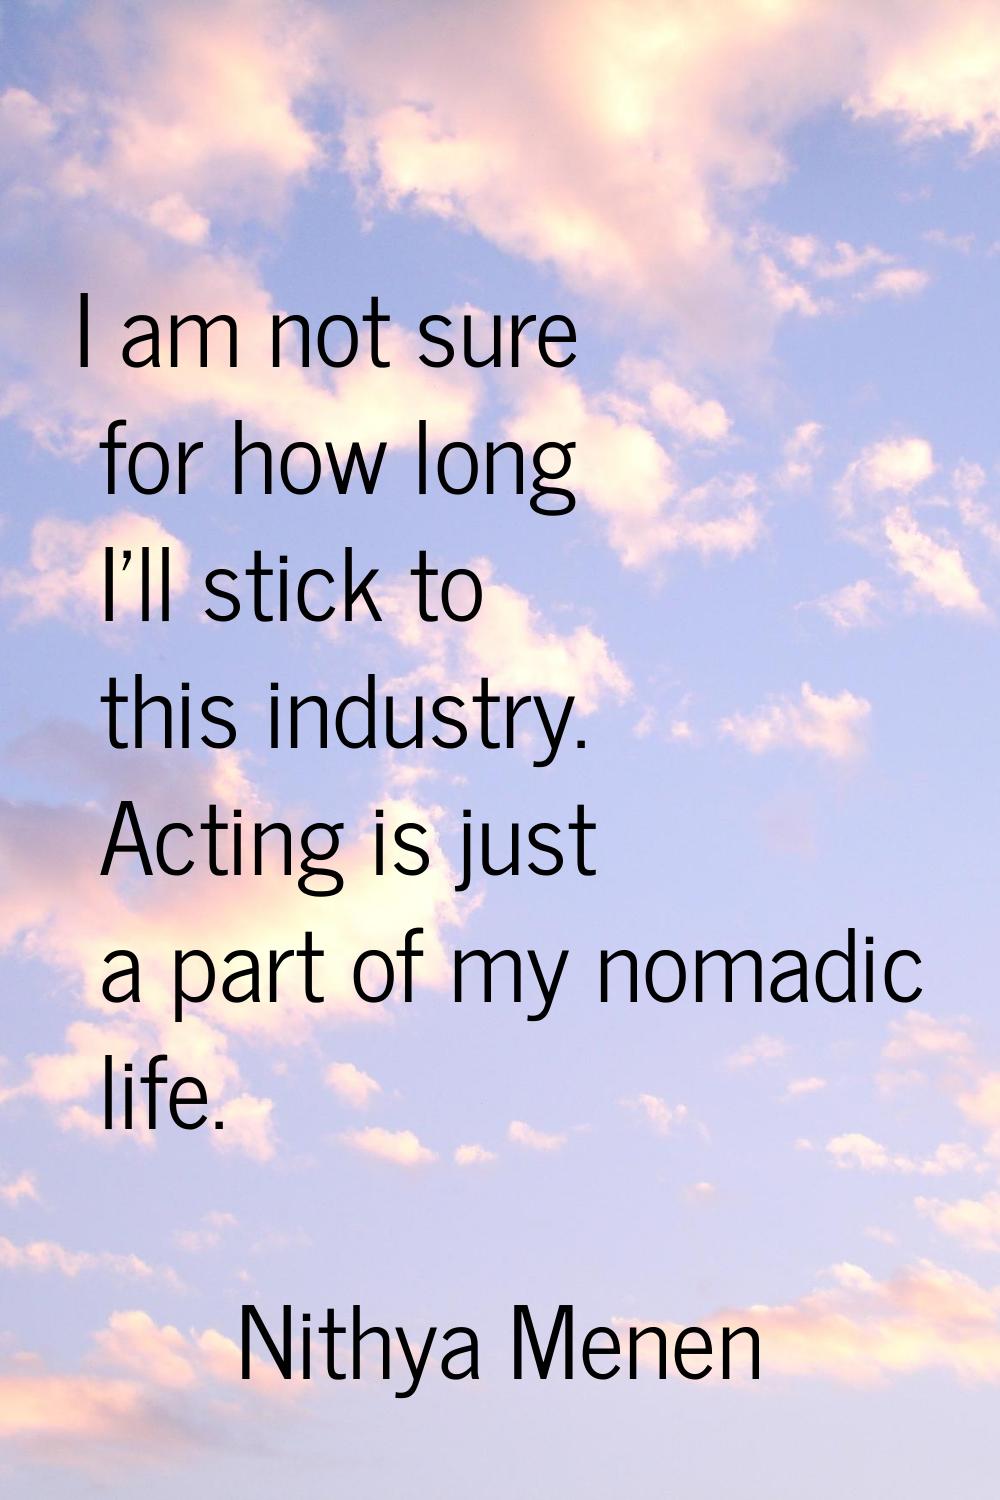 I am not sure for how long I'll stick to this industry. Acting is just a part of my nomadic life.